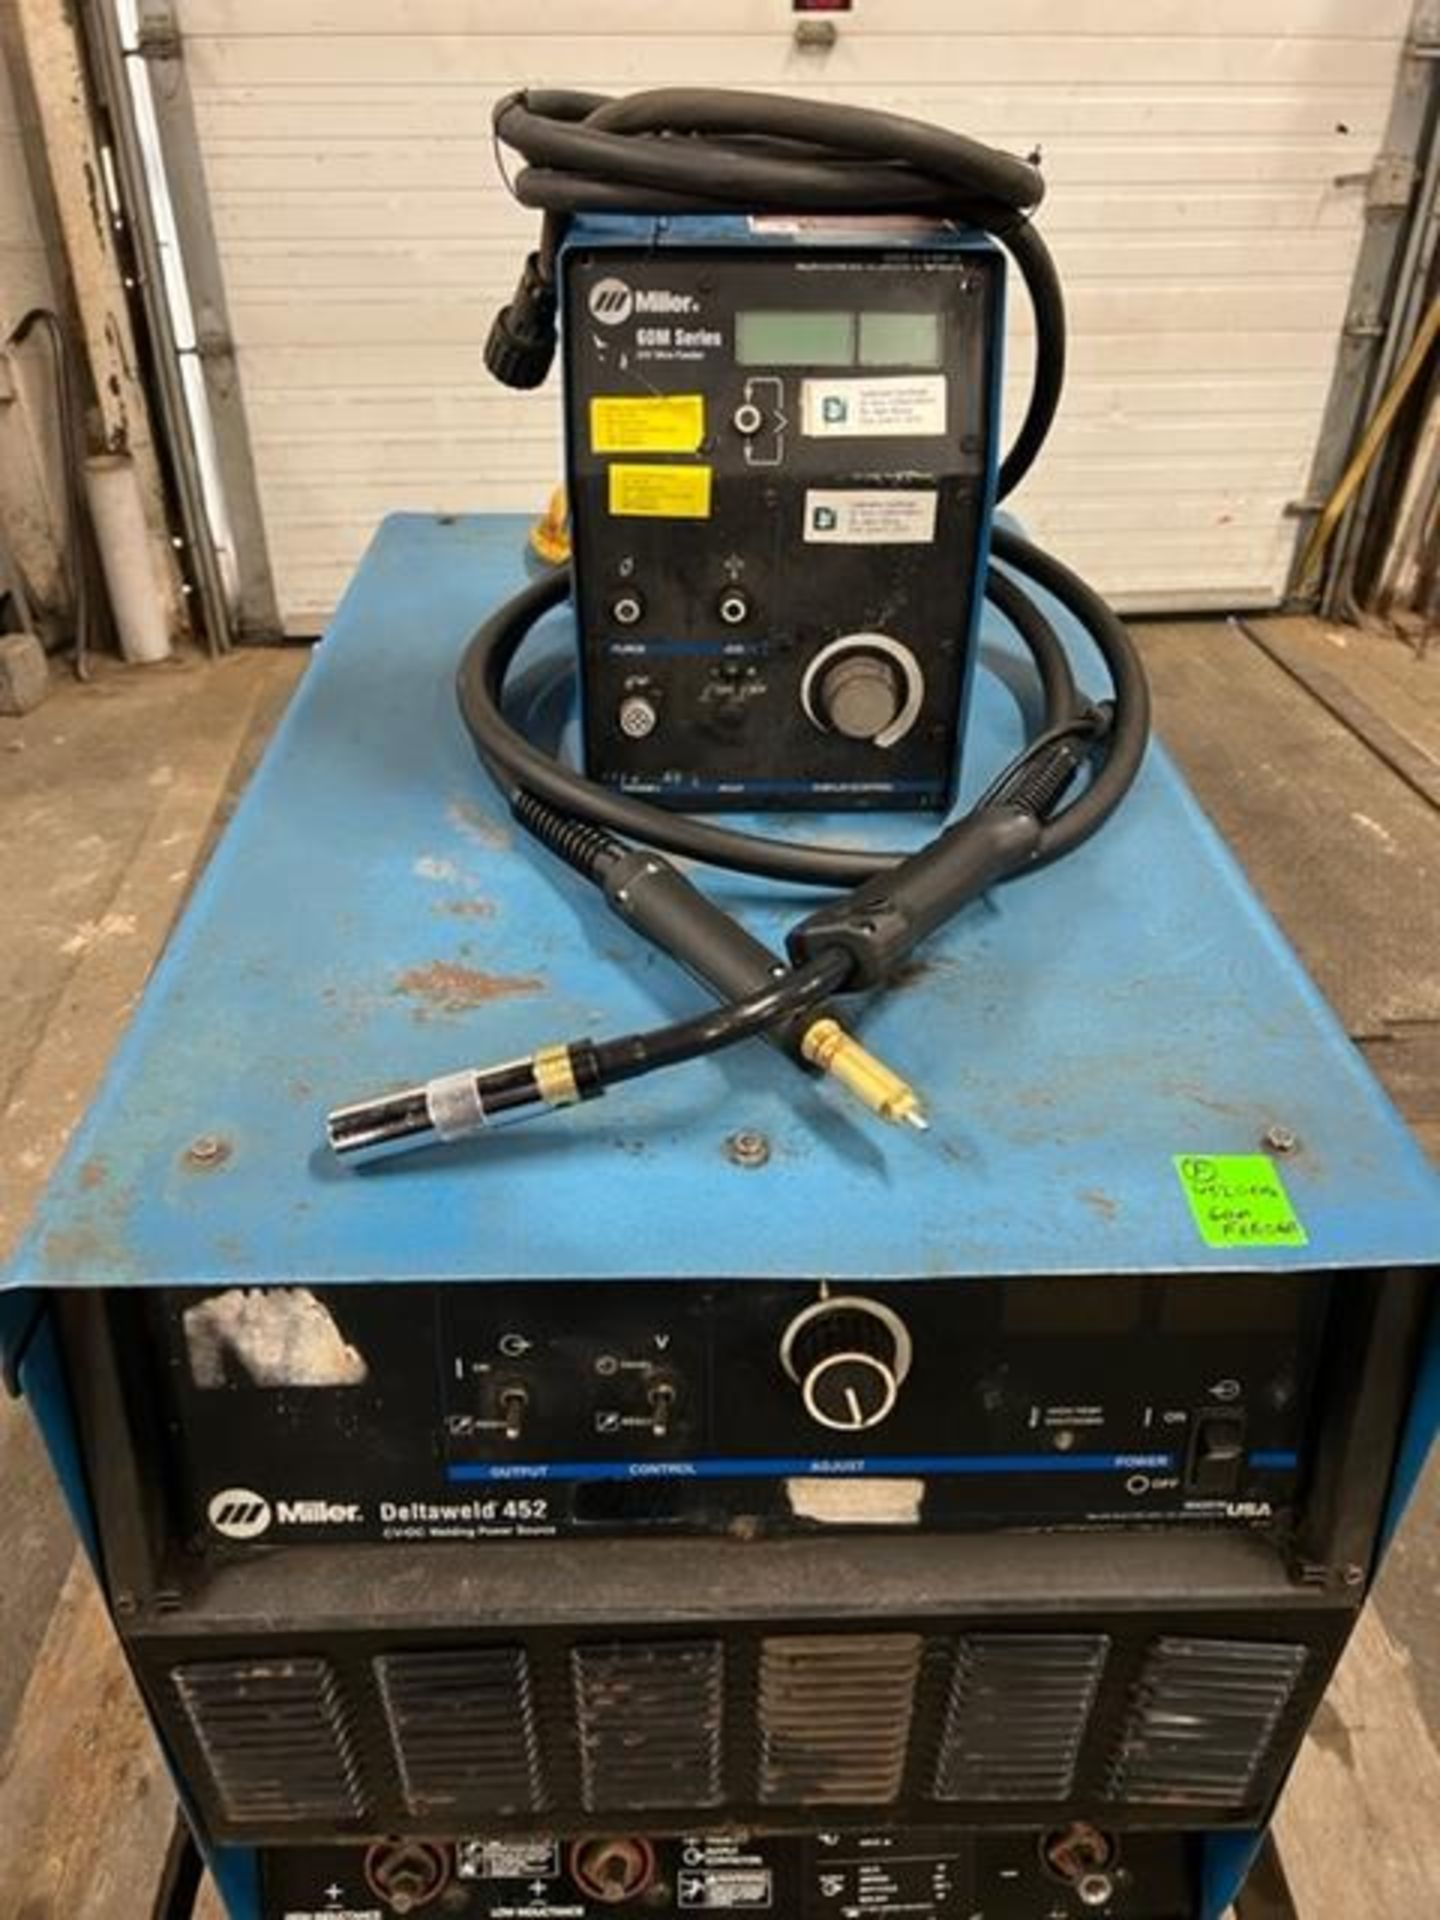 Miller Deltaweld 452 Mig Welder 450 Amp with 60M-S WIRE FEEDER 4-wheel COMPLETE with New Mig Gun and - Image 2 of 2